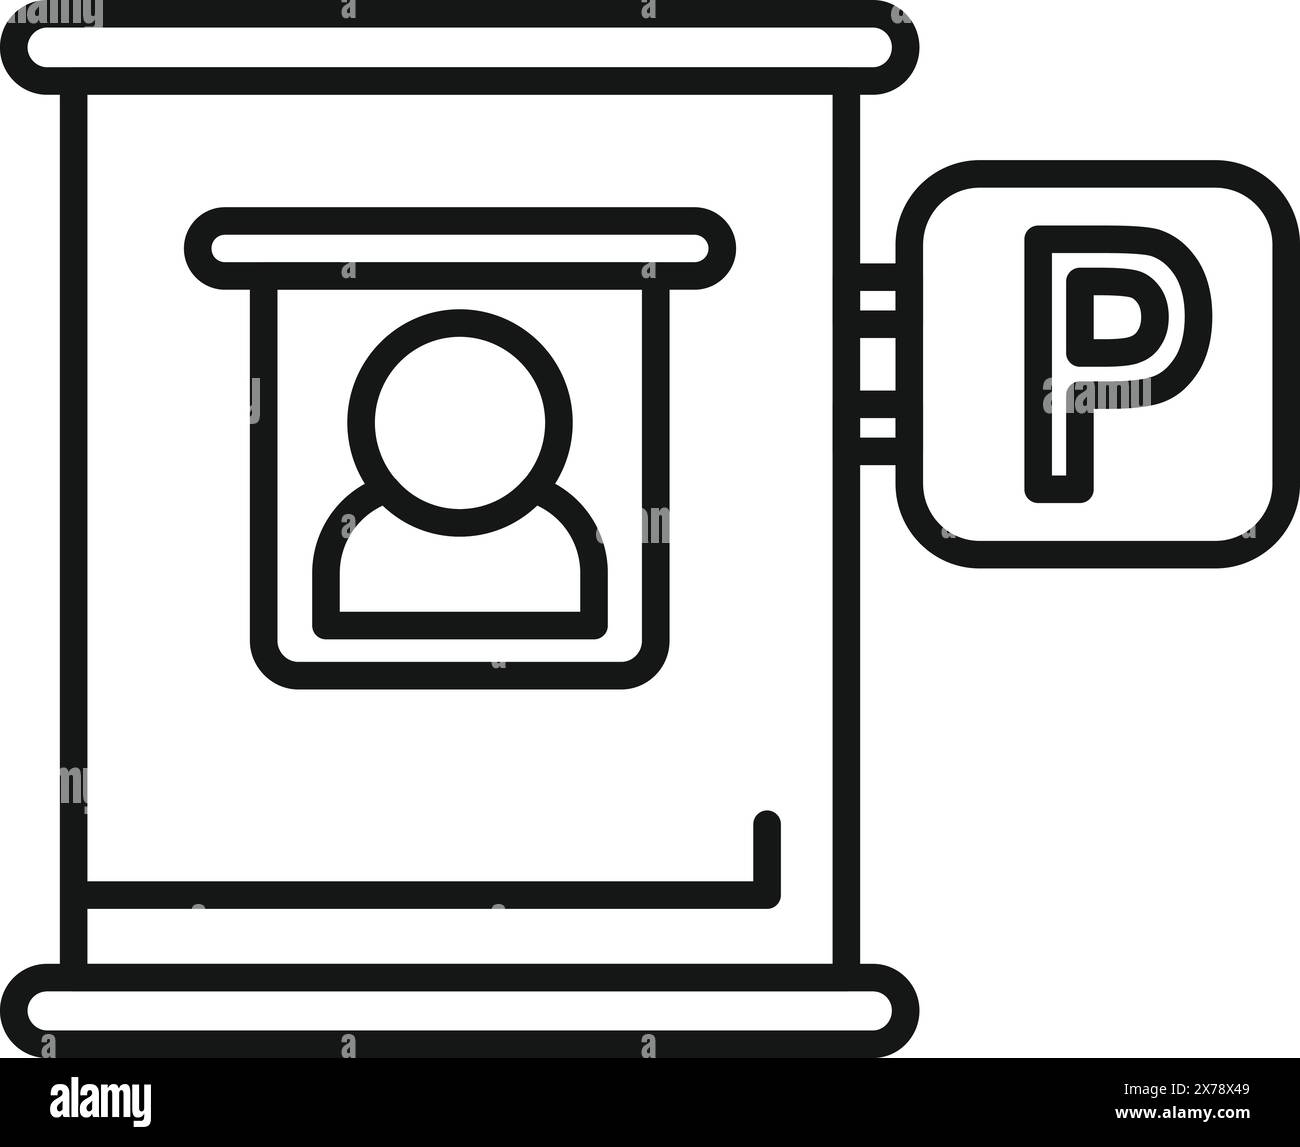 Black and white vector illustration of a parking meter with a profile icon Stock Vector